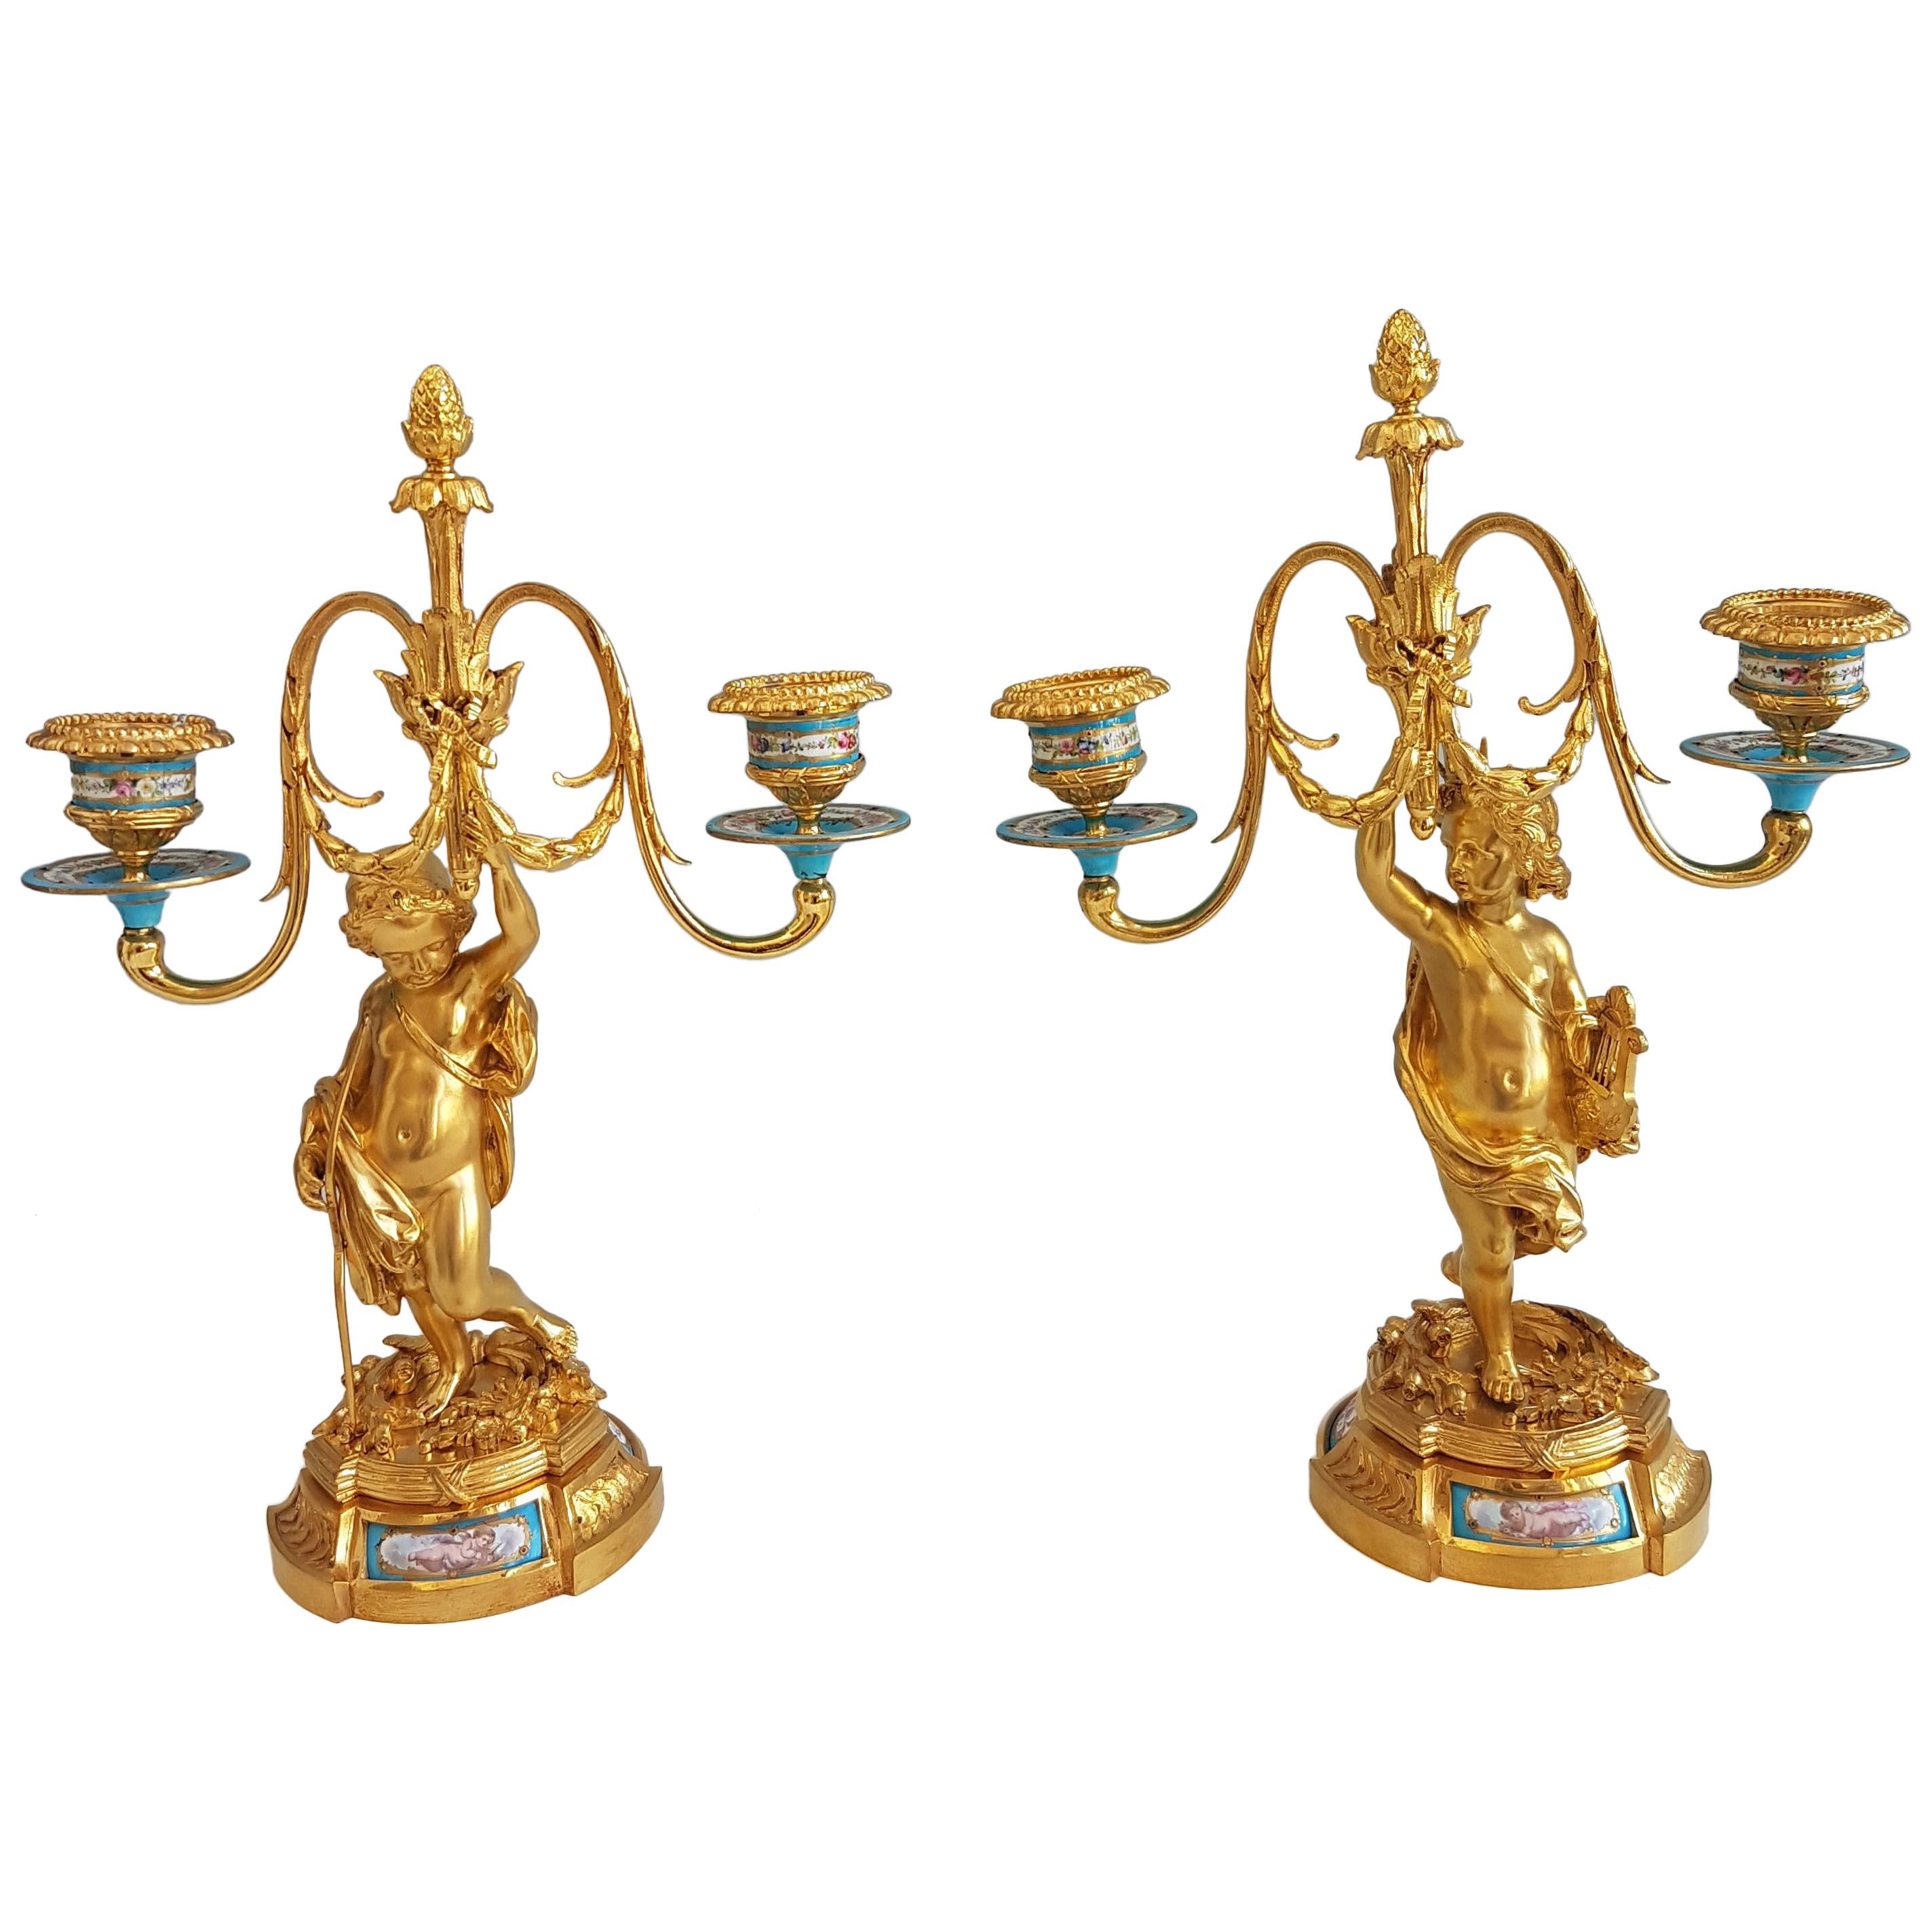 Pair of French Ormolu and Porcelain Candelabra